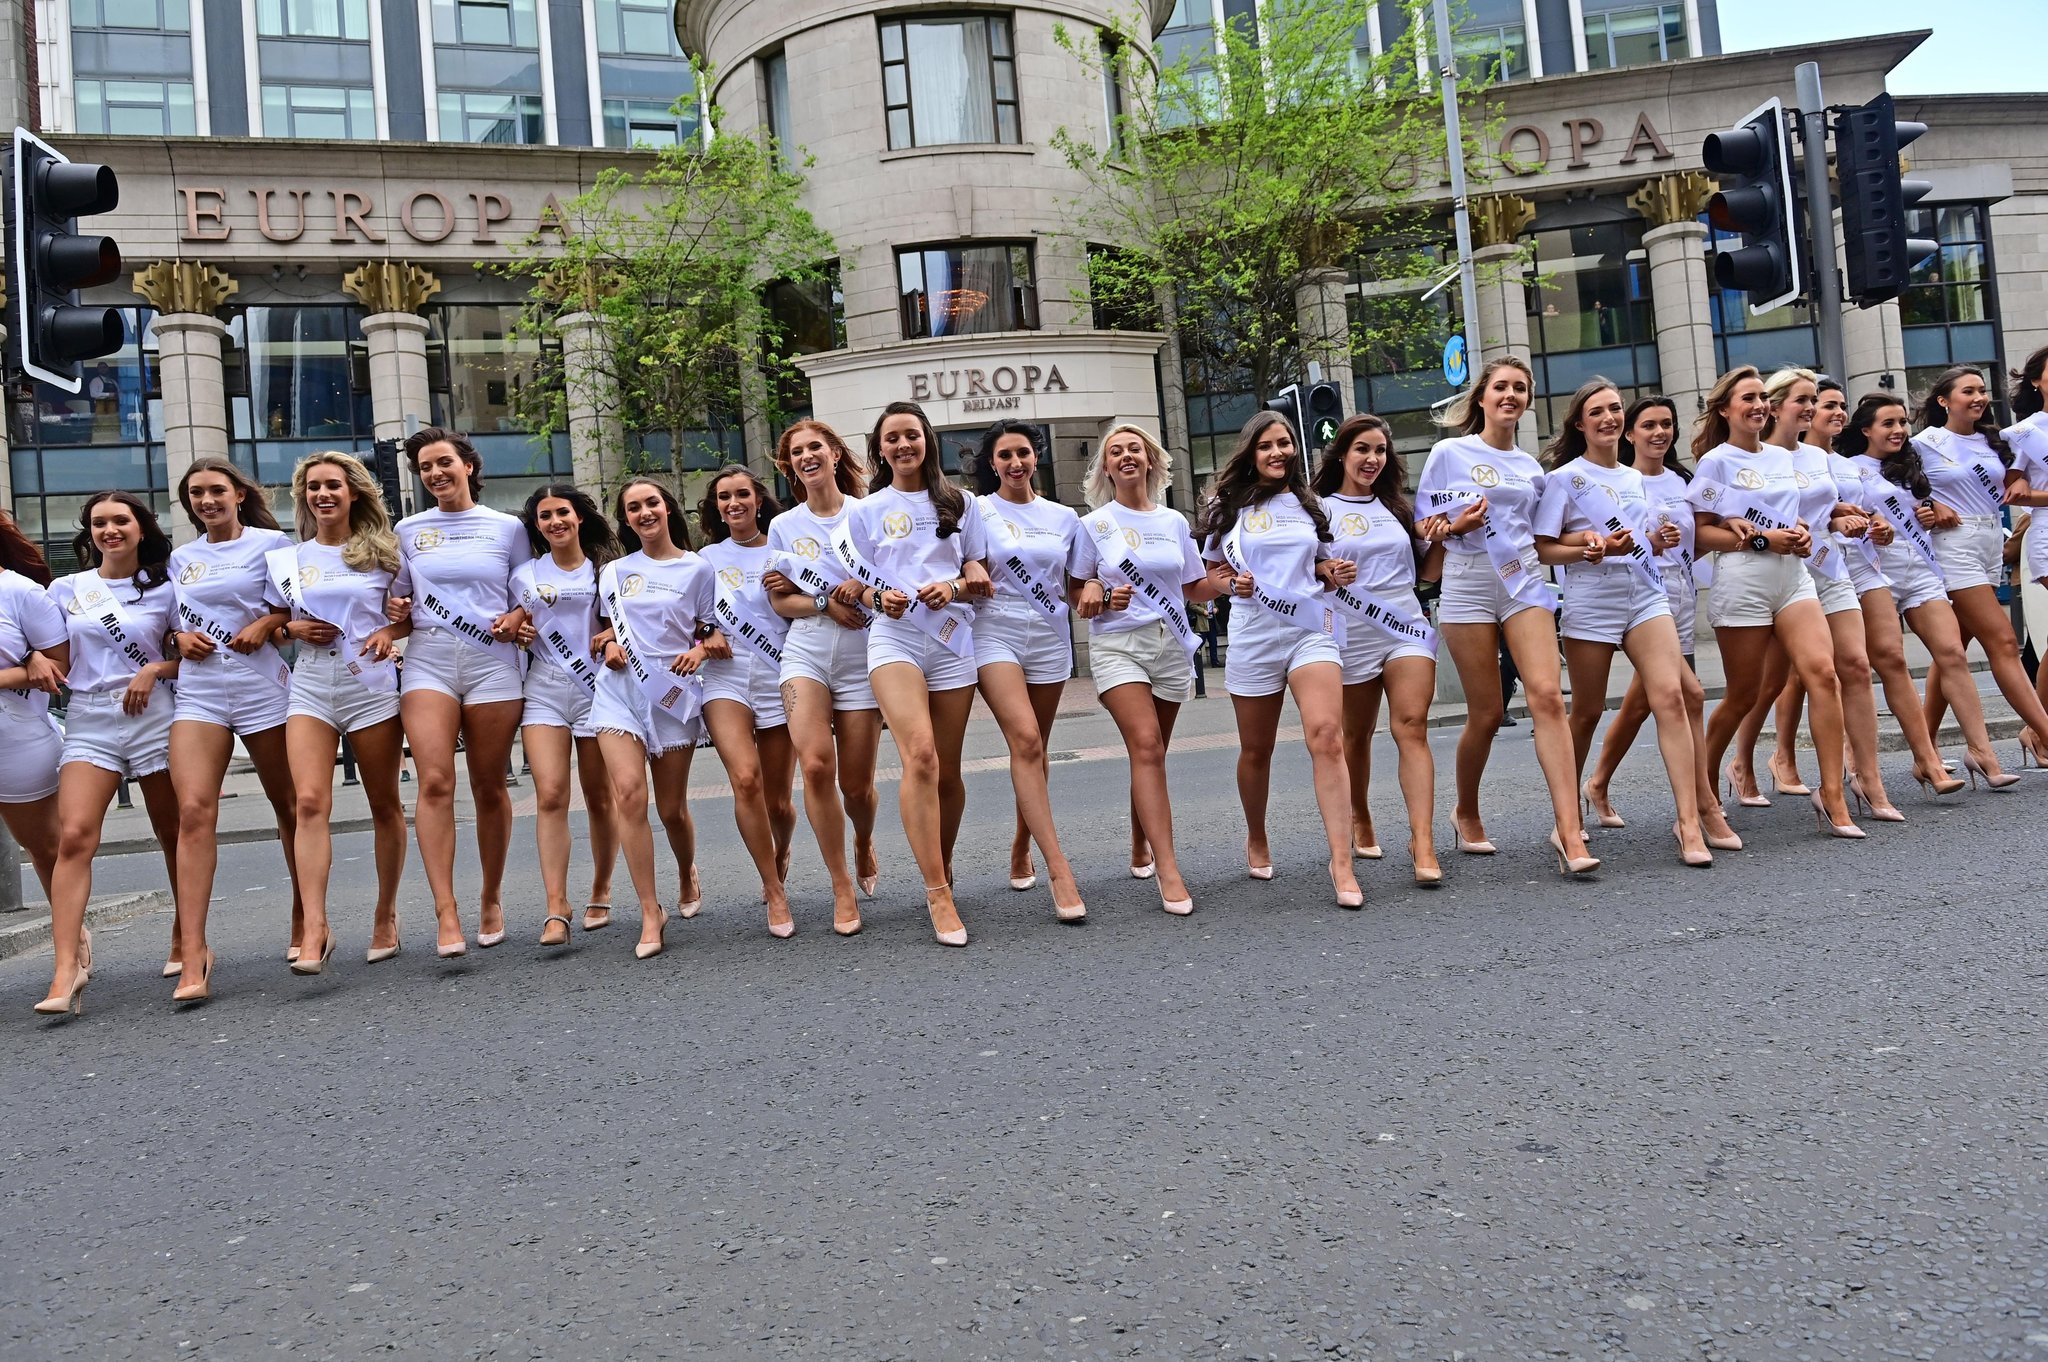 Miss Northern Ireland 2022: Meet the finalists ahead of the Europa Hotel gala event